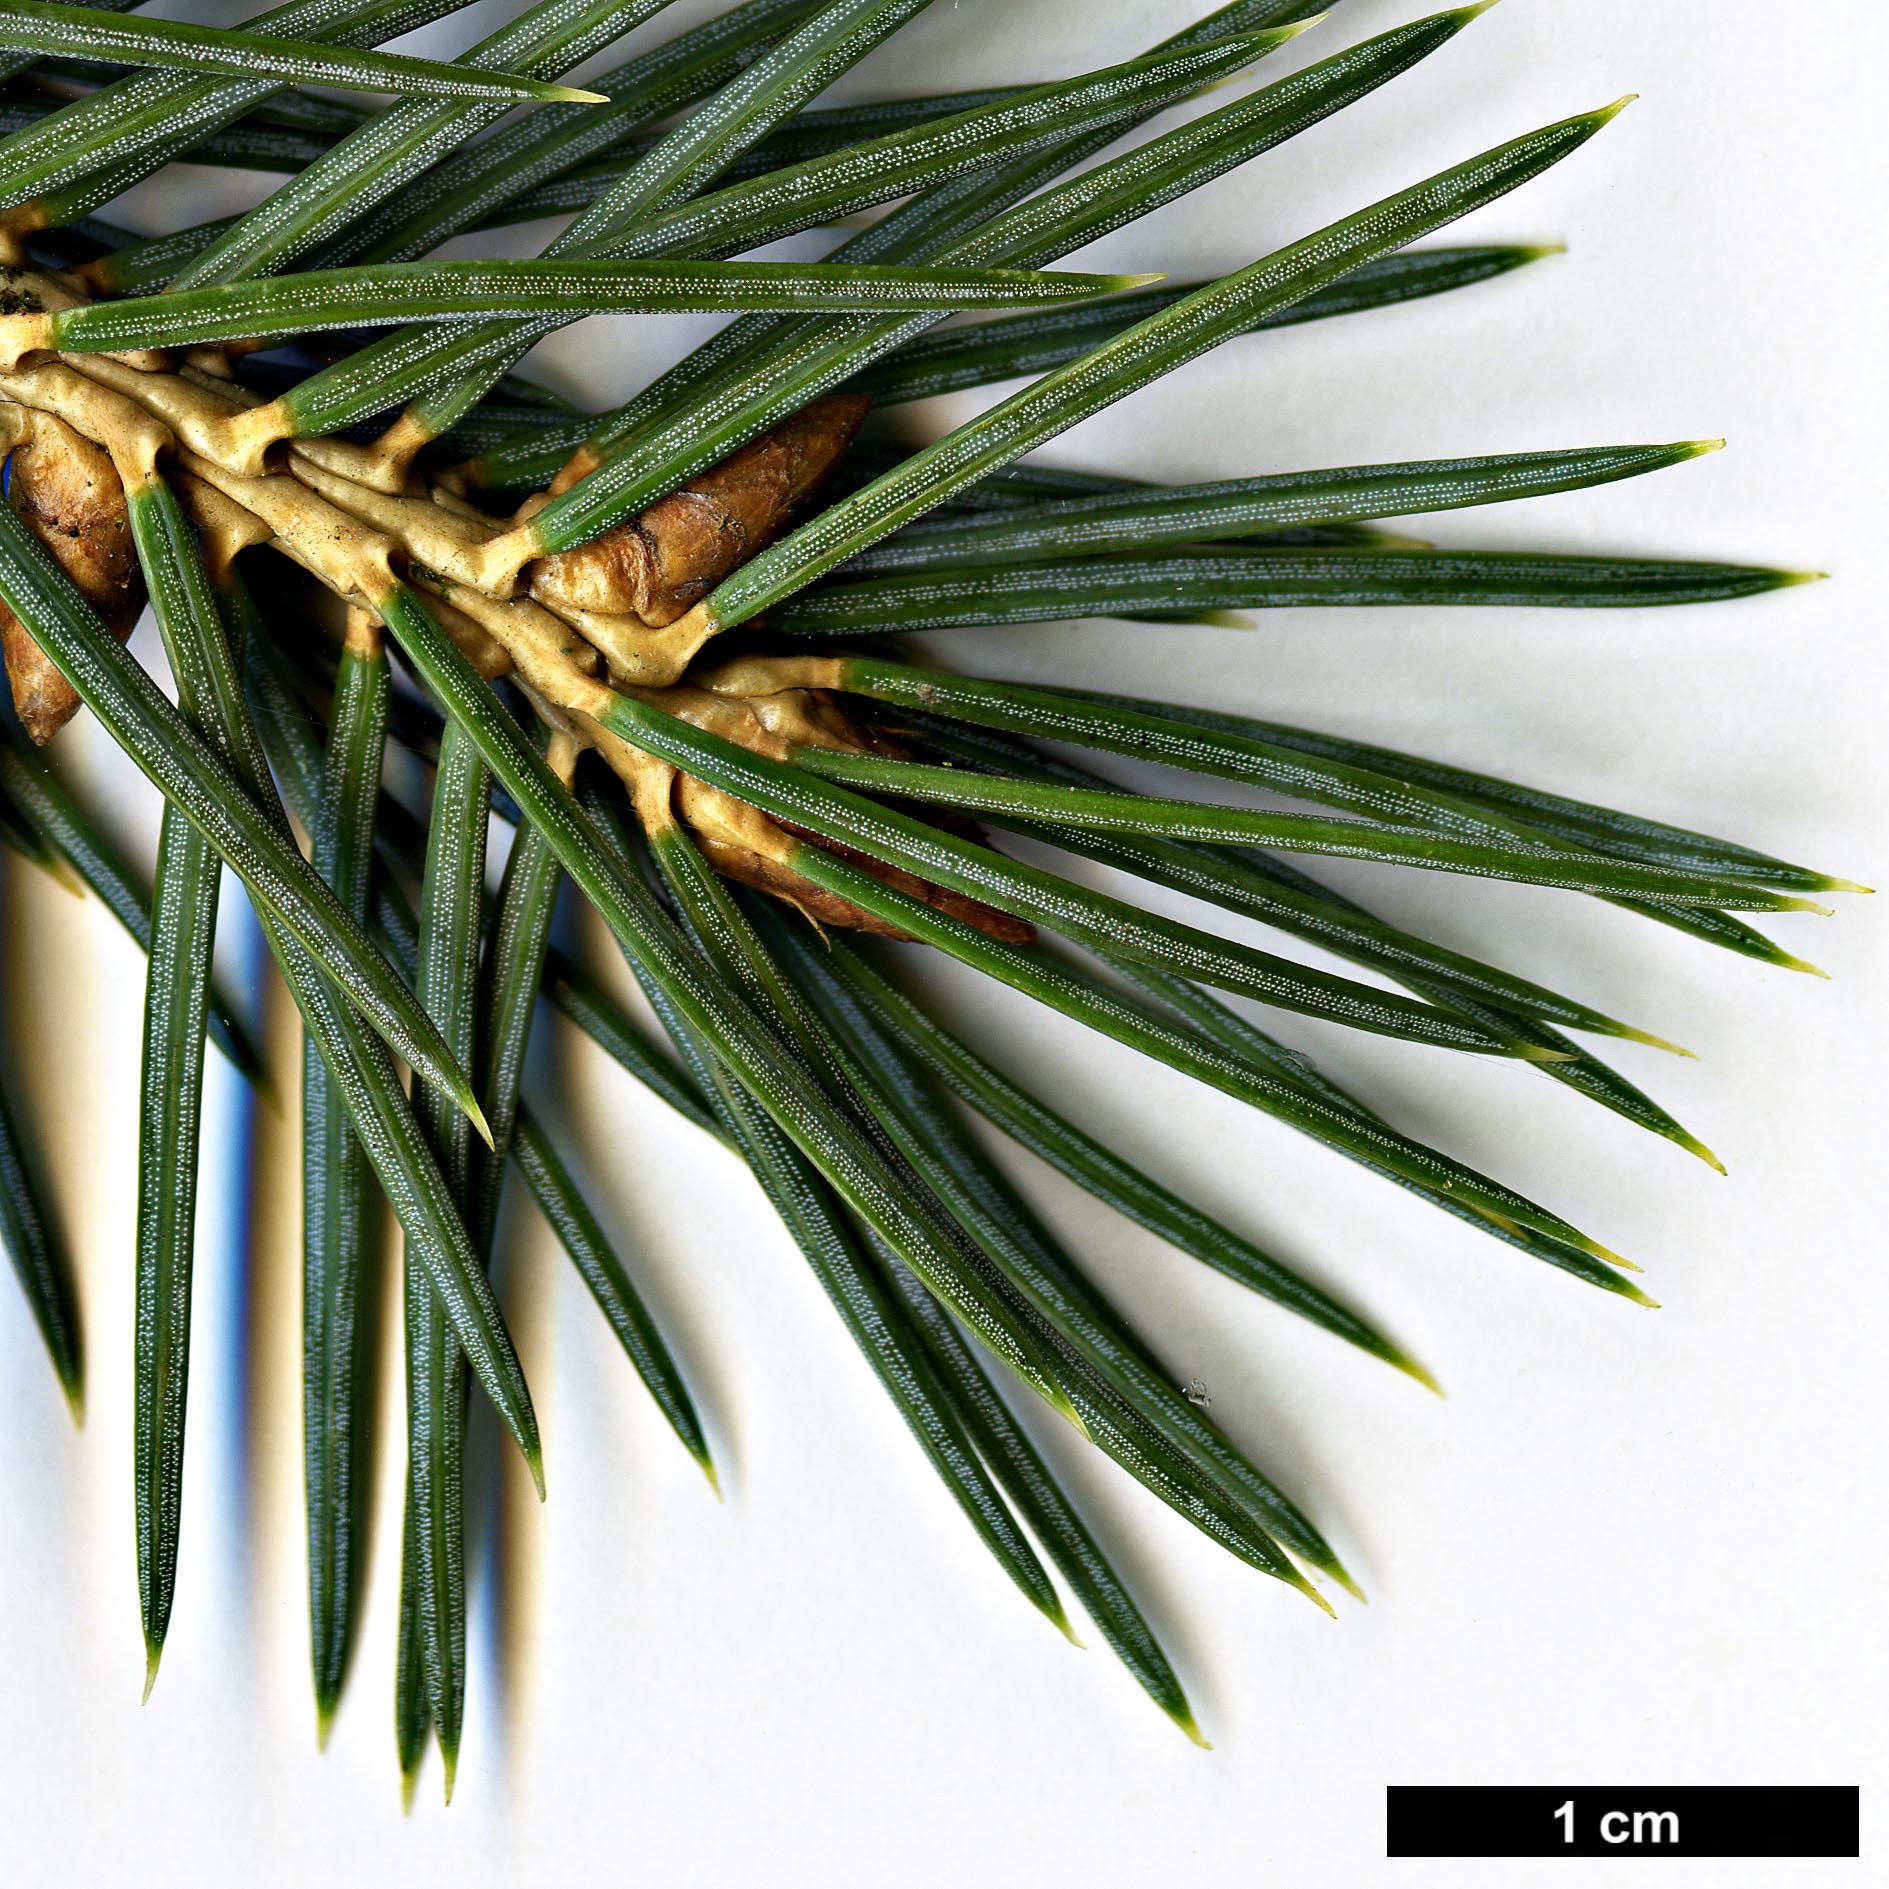 High resolution image: Family: Pinaceae - Genus: Picea - Taxon: chihuahuana